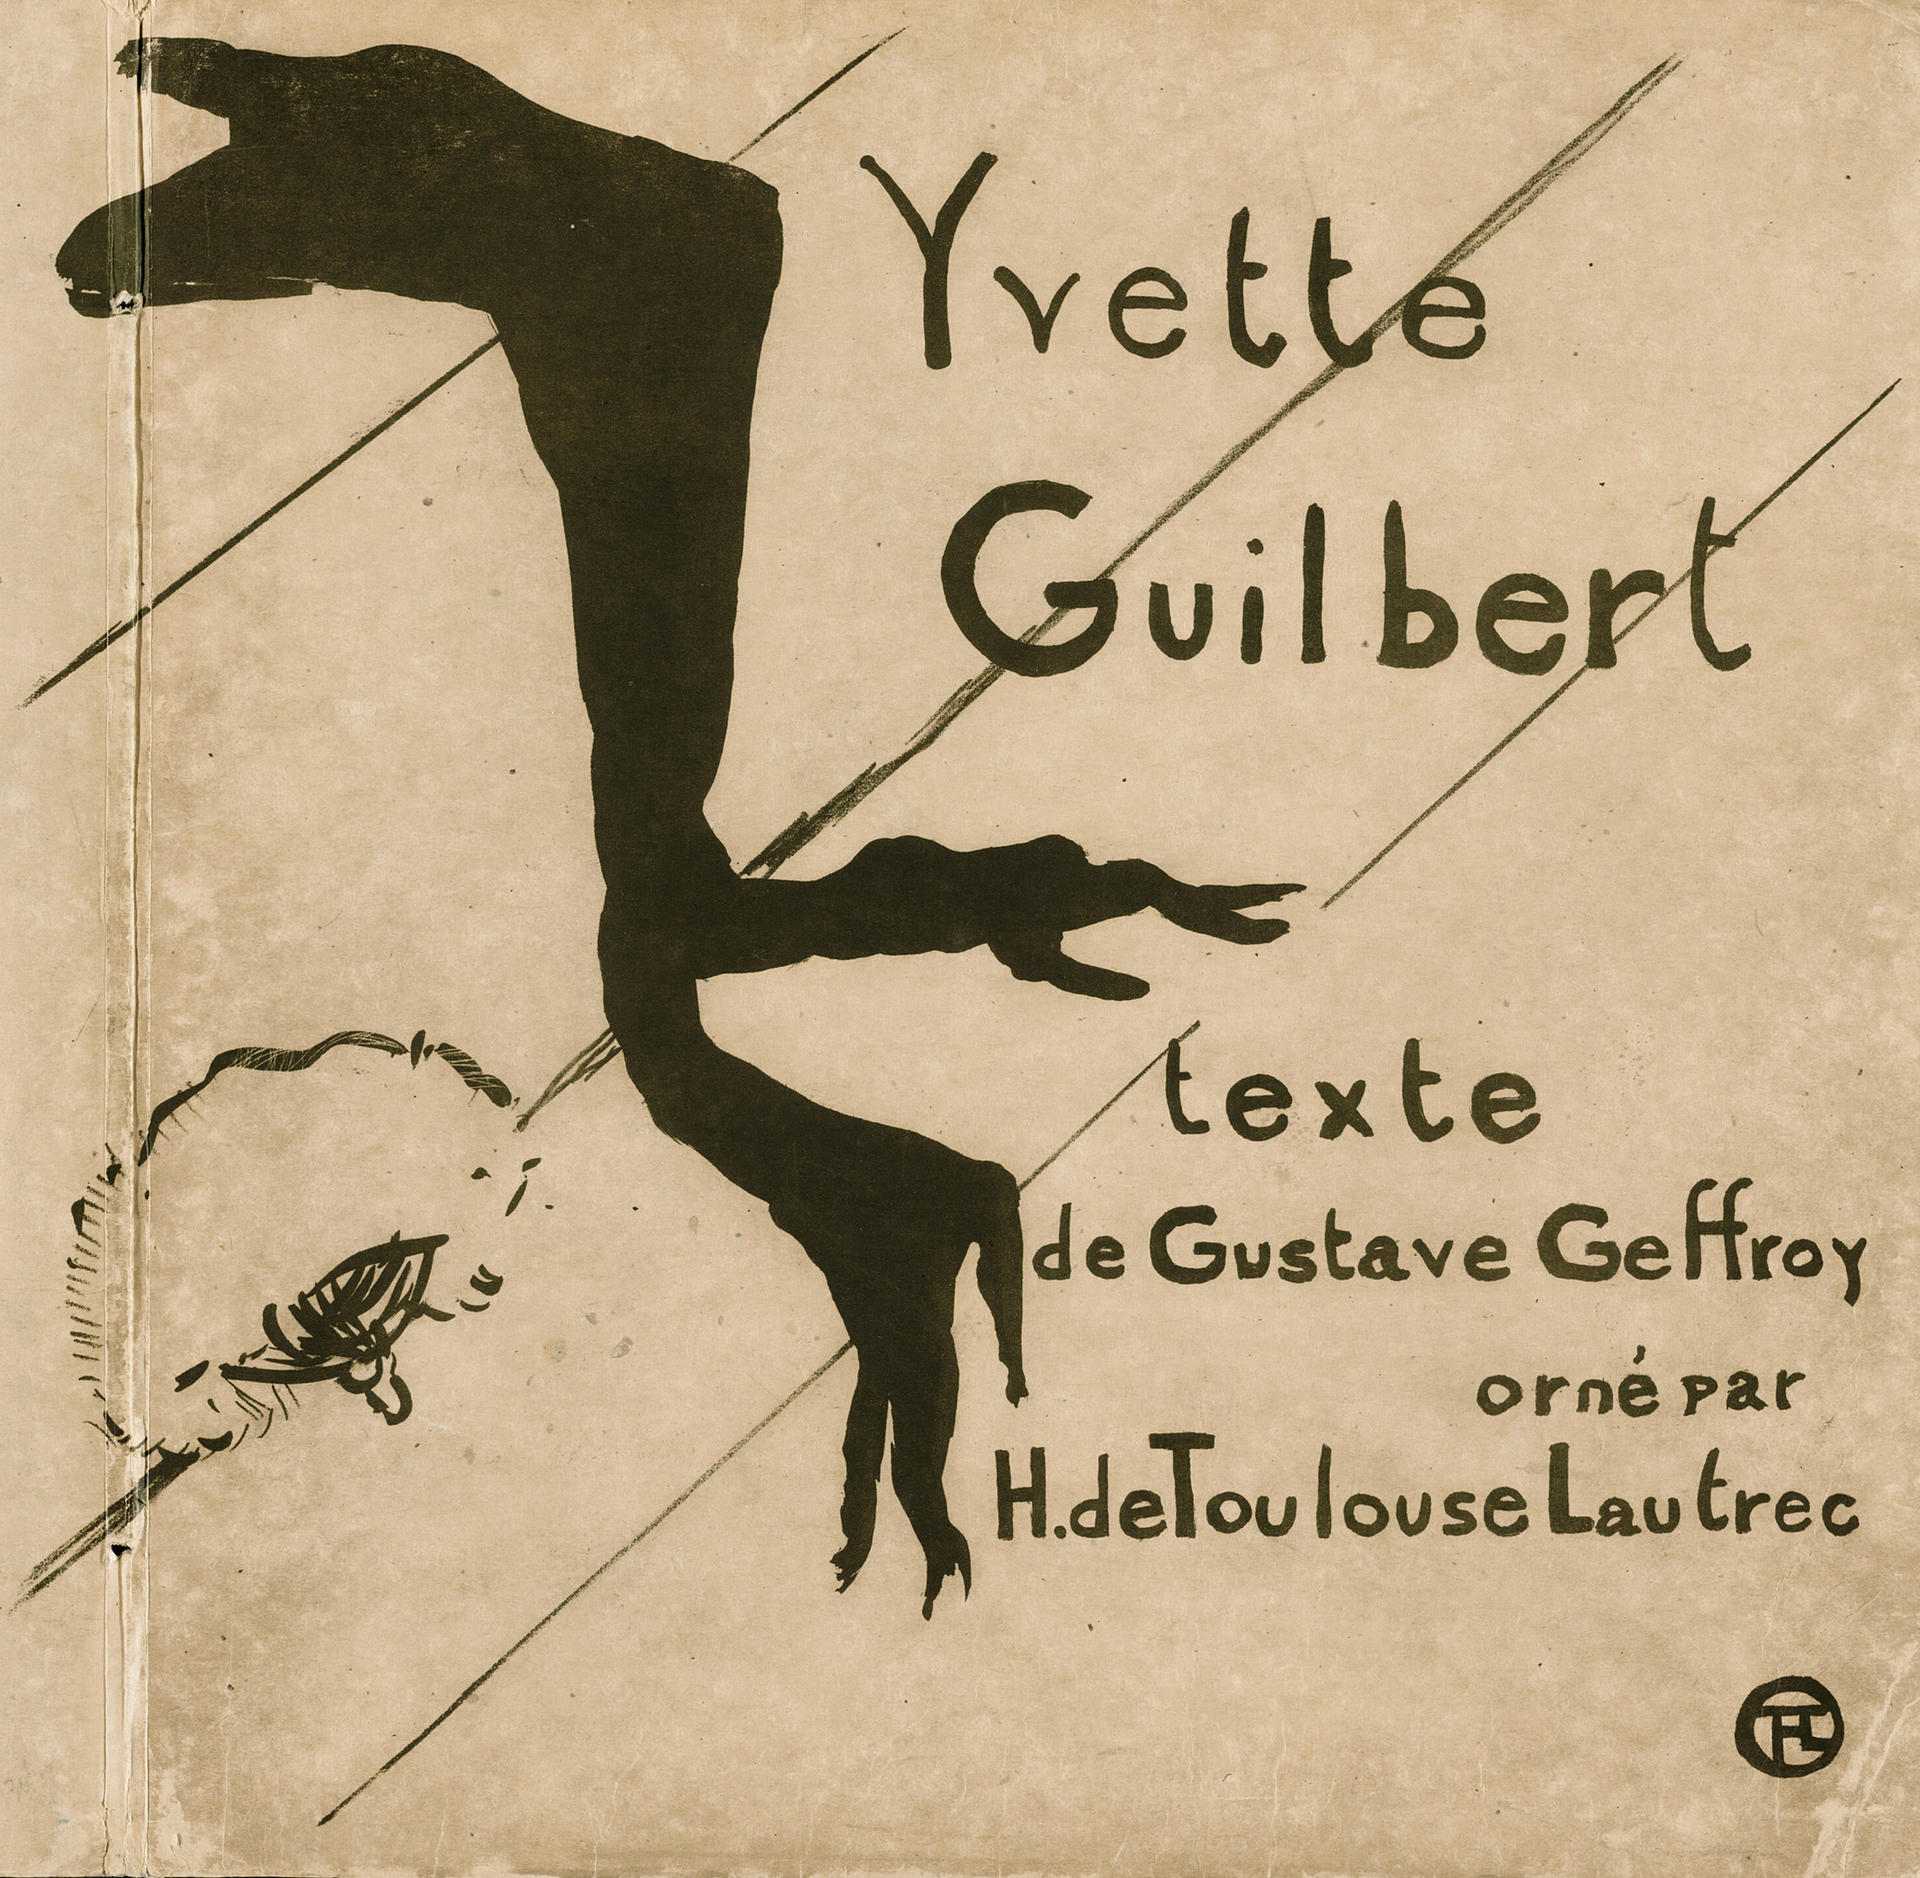 Cover for 'Yvette Guilbert' publication. Long black gloves lie on a step, which is simply suggested by diagonal lines crossing the sheet, a powder puff at left. Text says: “Yvette Guilbert. Texte de Gustave Geffroy orné par H. de Toulouse Lautrec.” 